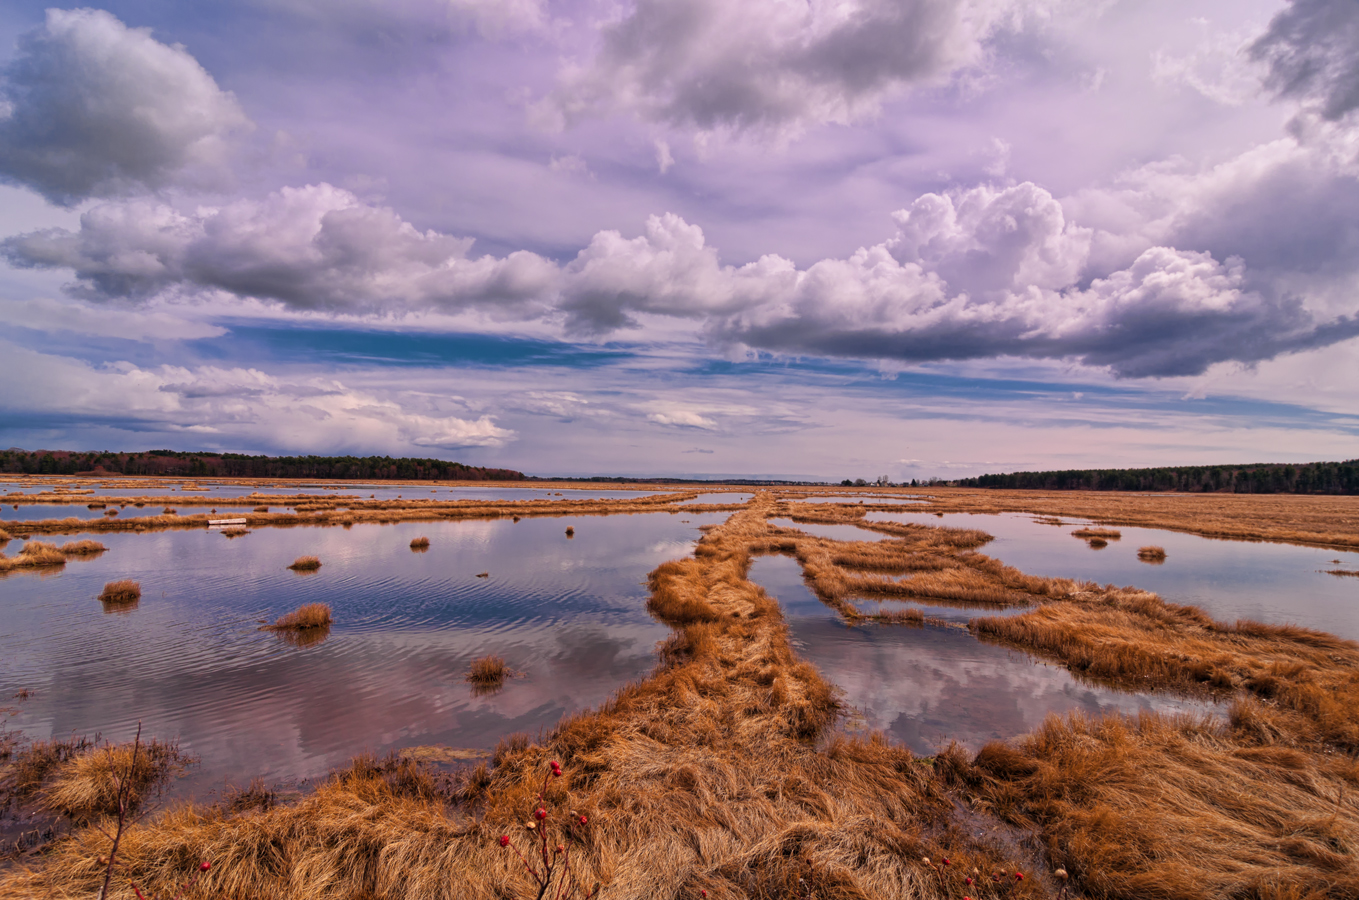 photo quest: Another trip to Scarborough Marsh